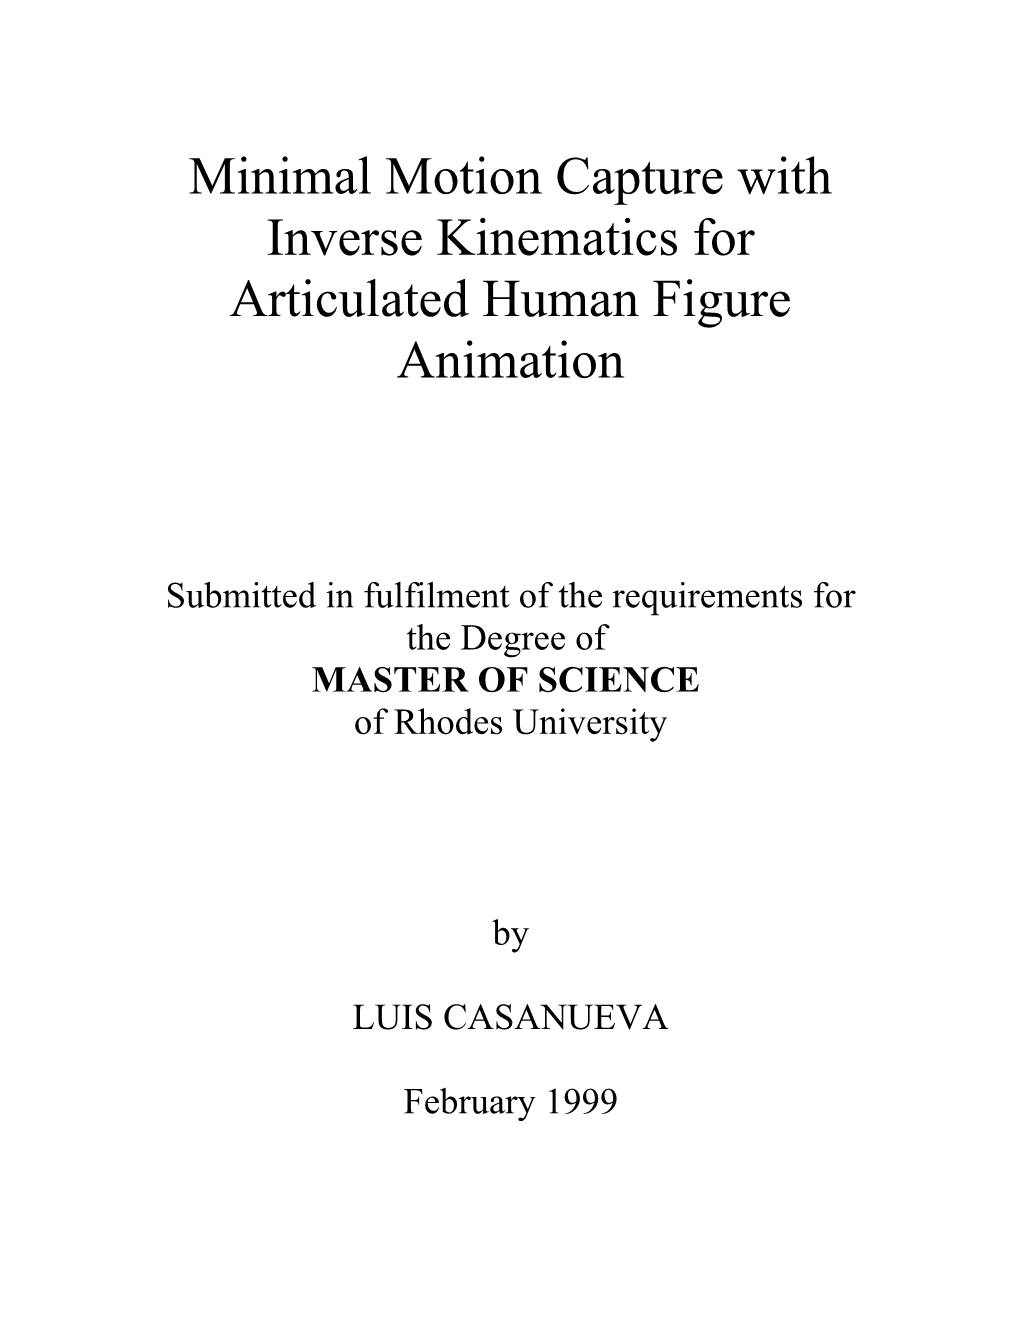 Minimal Motion Capture with Inverse Kinematics for Articulated Human Figure Animation